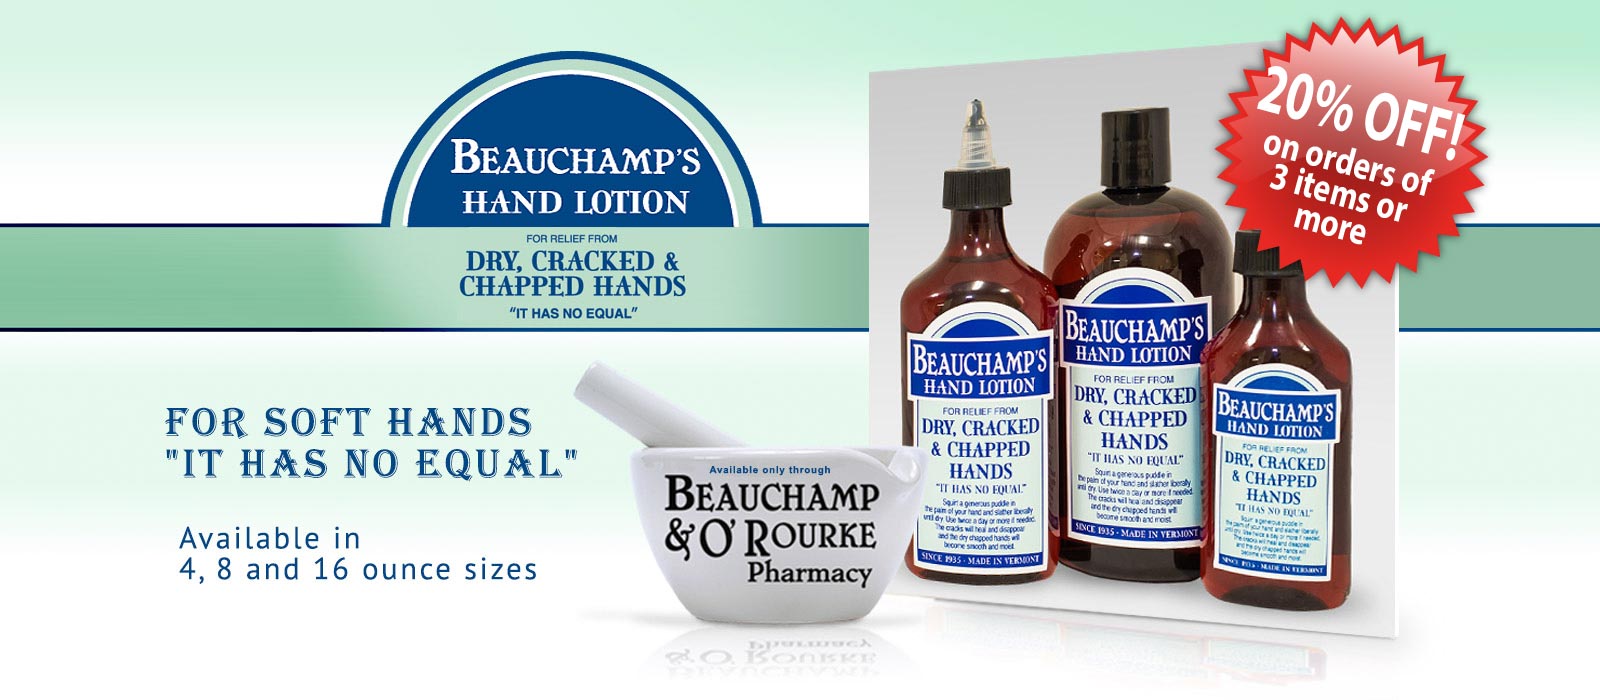 Hand Lotion, Dry Hands, Chapped Hands, Beauchamp's Hand Lotion